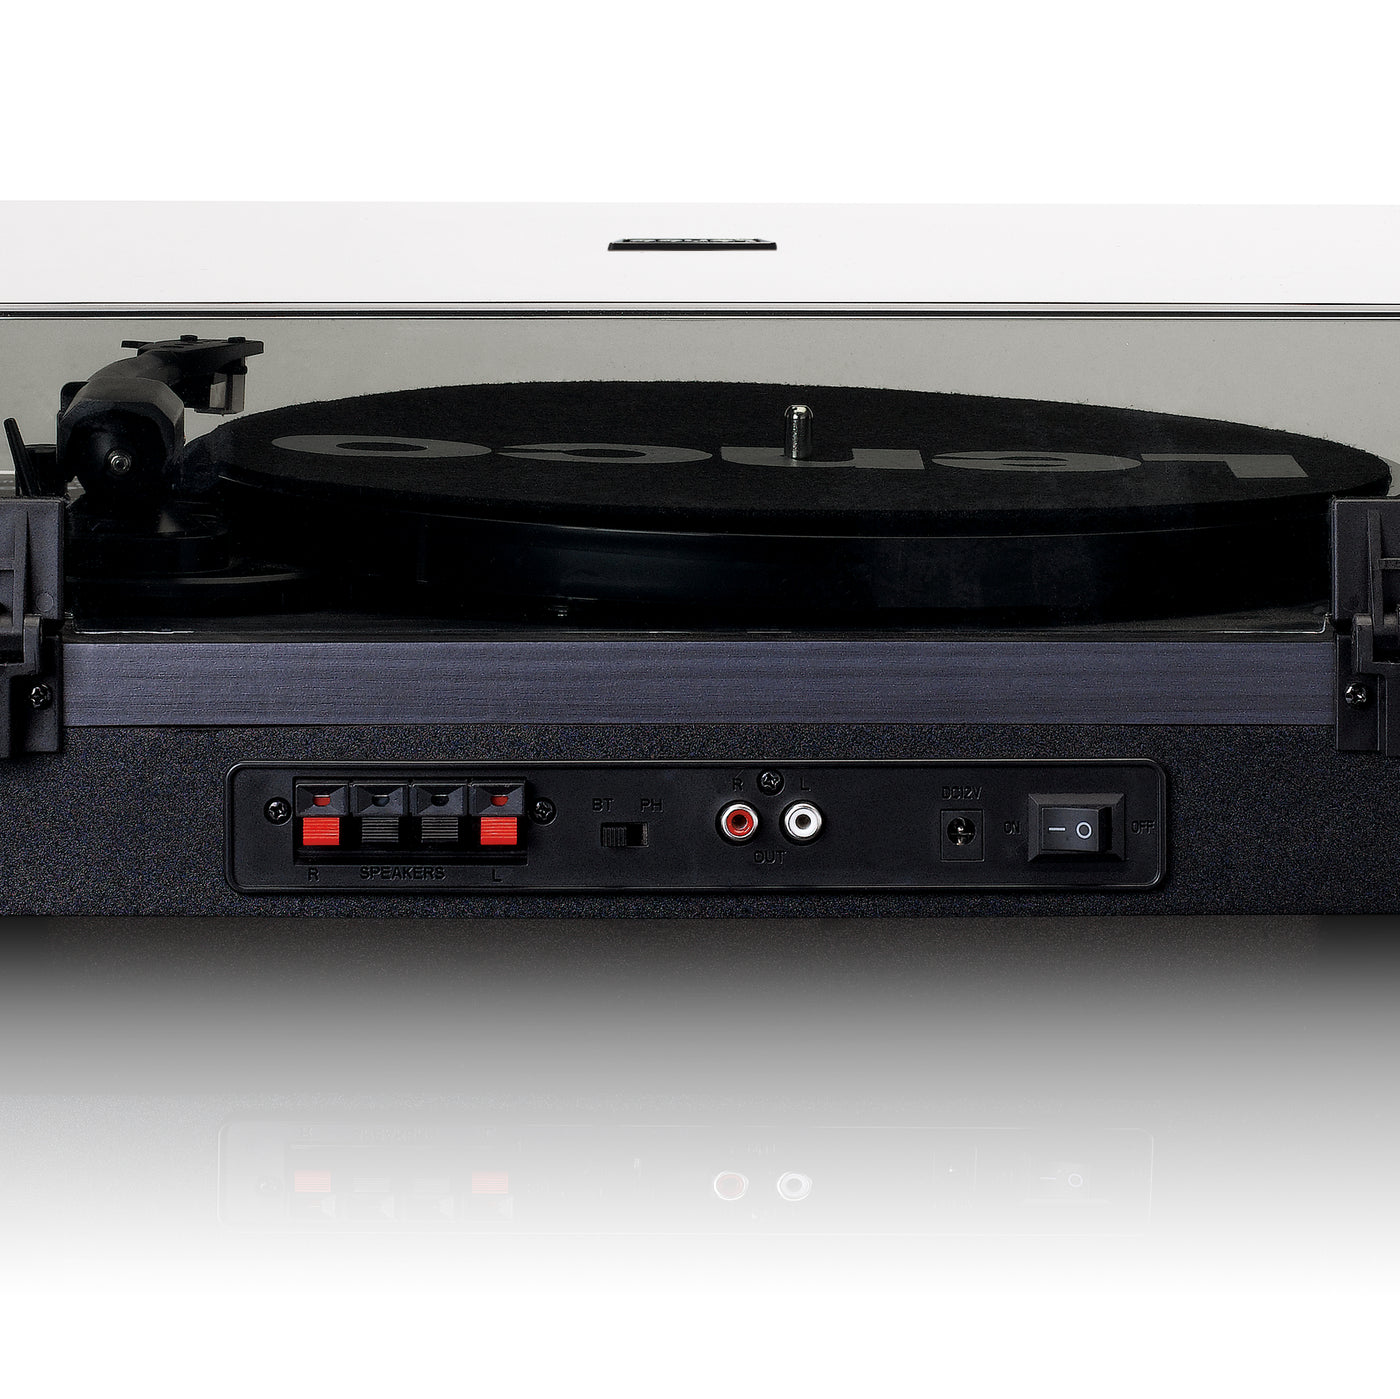 LENCO LS-301BK - Turntable with Bluetooth® and two separate speakers, black